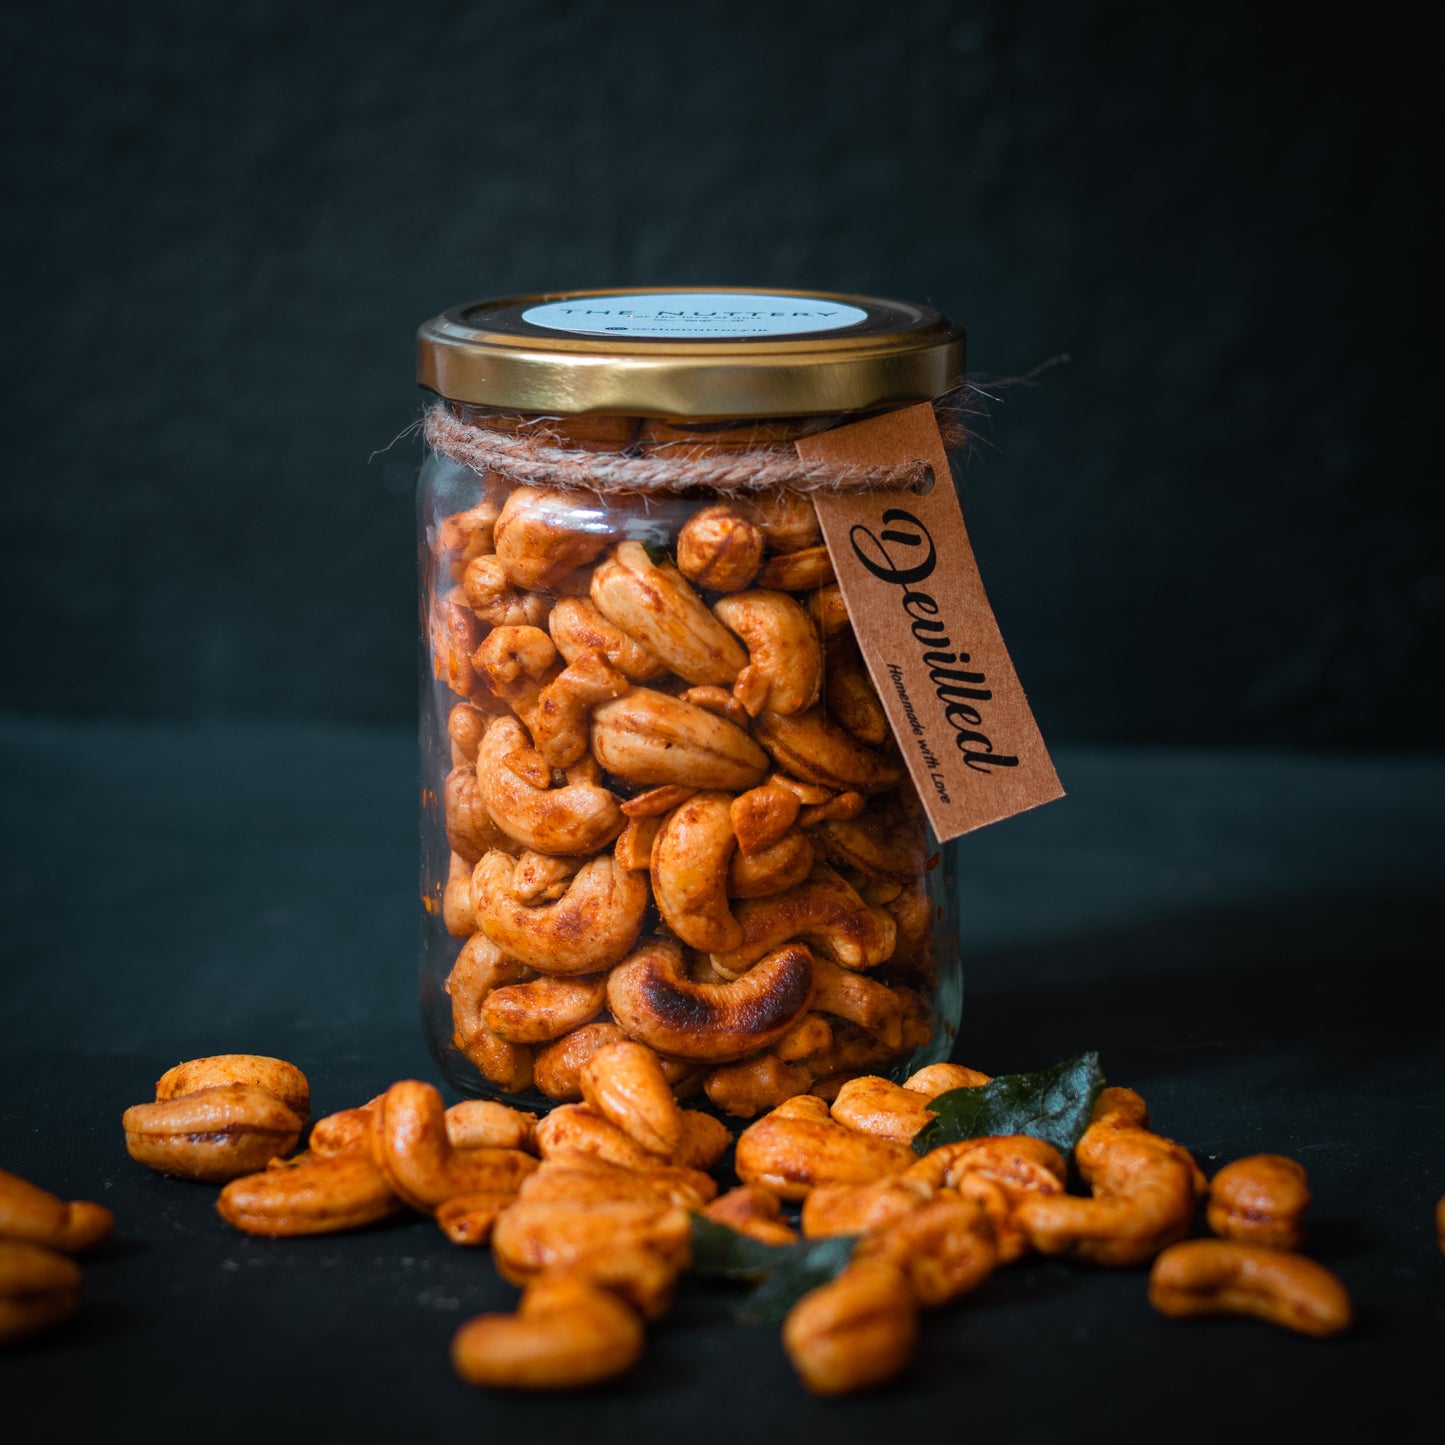 Devilled Cashews - The Nuttery